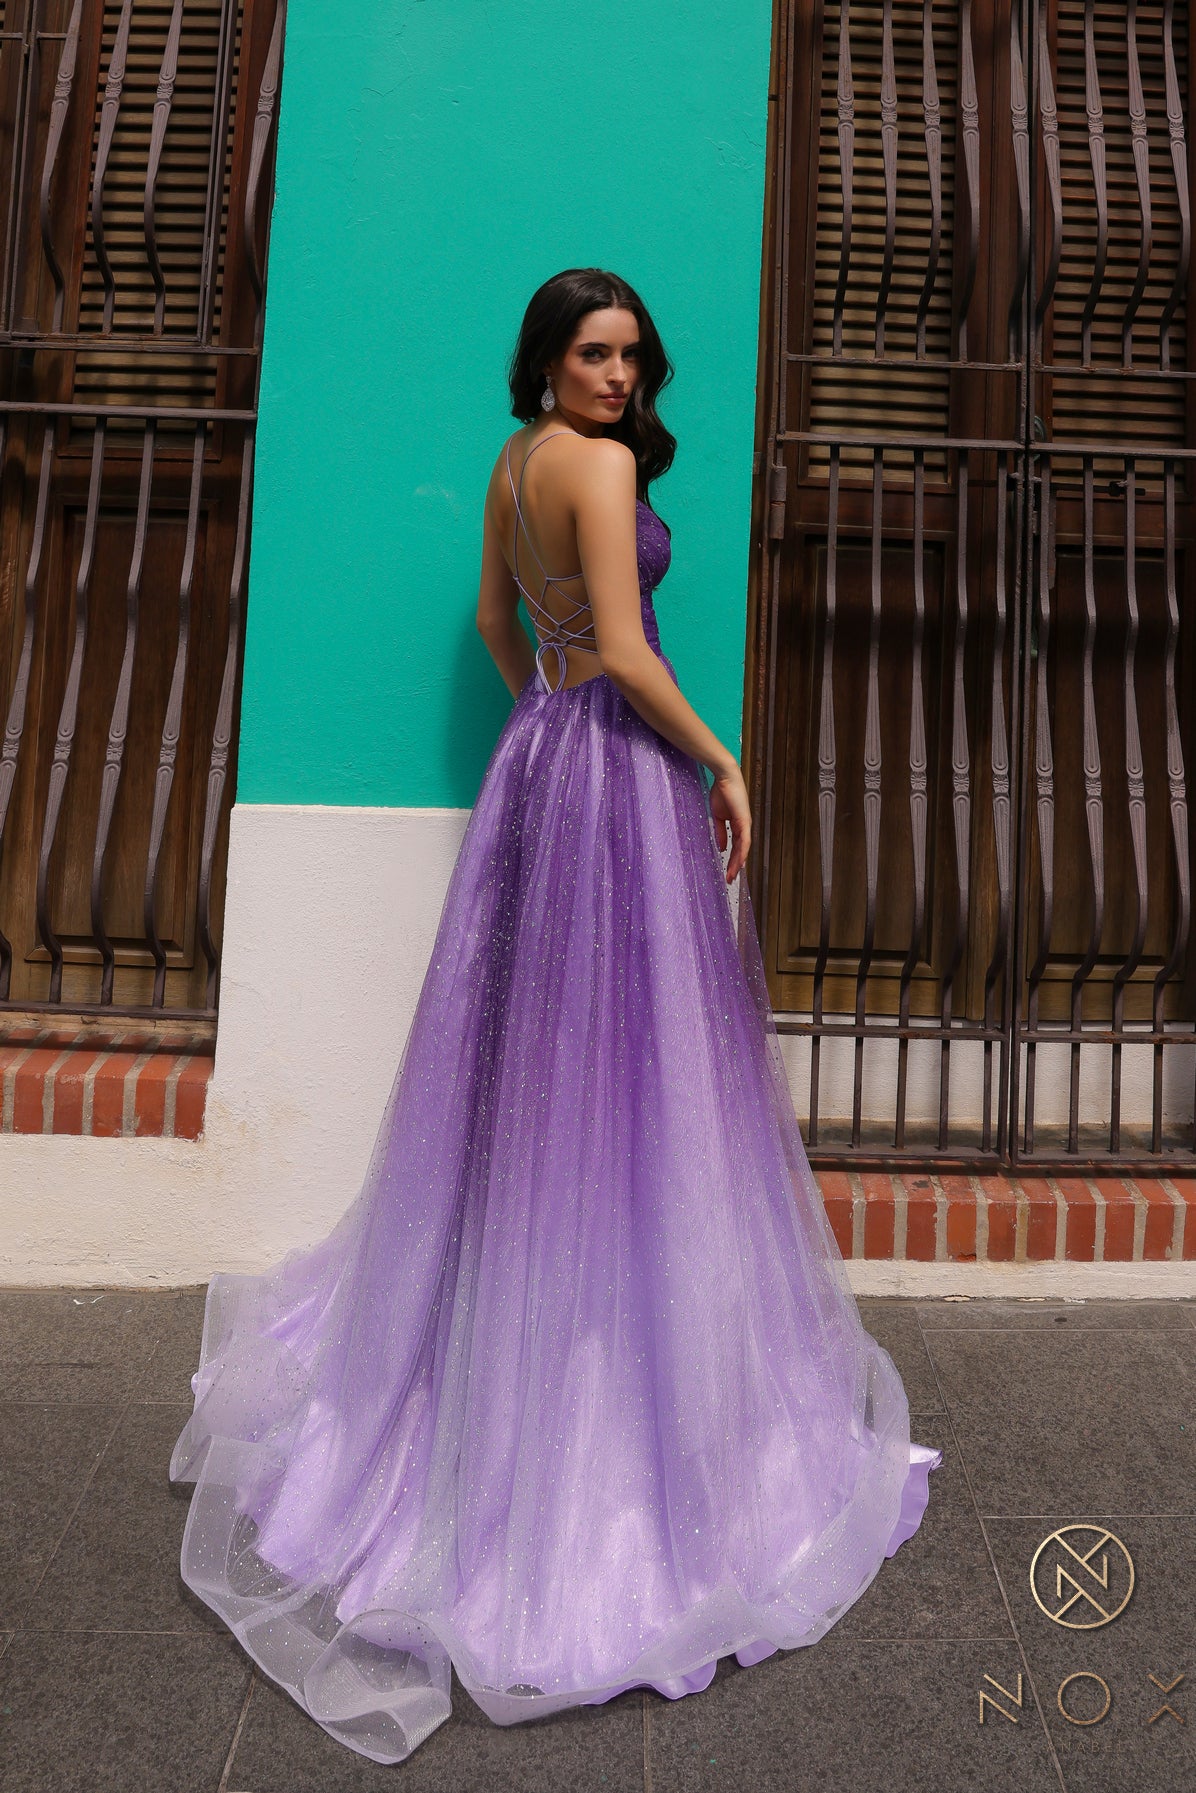 Get ready to make a statement at your next formal event with the Nox Anabel C1251 Long Shimmer Ombre A Line Slit Prom Dress. The backless corset adds a touch of elegance, while the A-line cut and side slit offer a flattering and stylish look. Perfect for prom, weddings, or any special occasion.  Sizes: 00-16  Colors: Purple